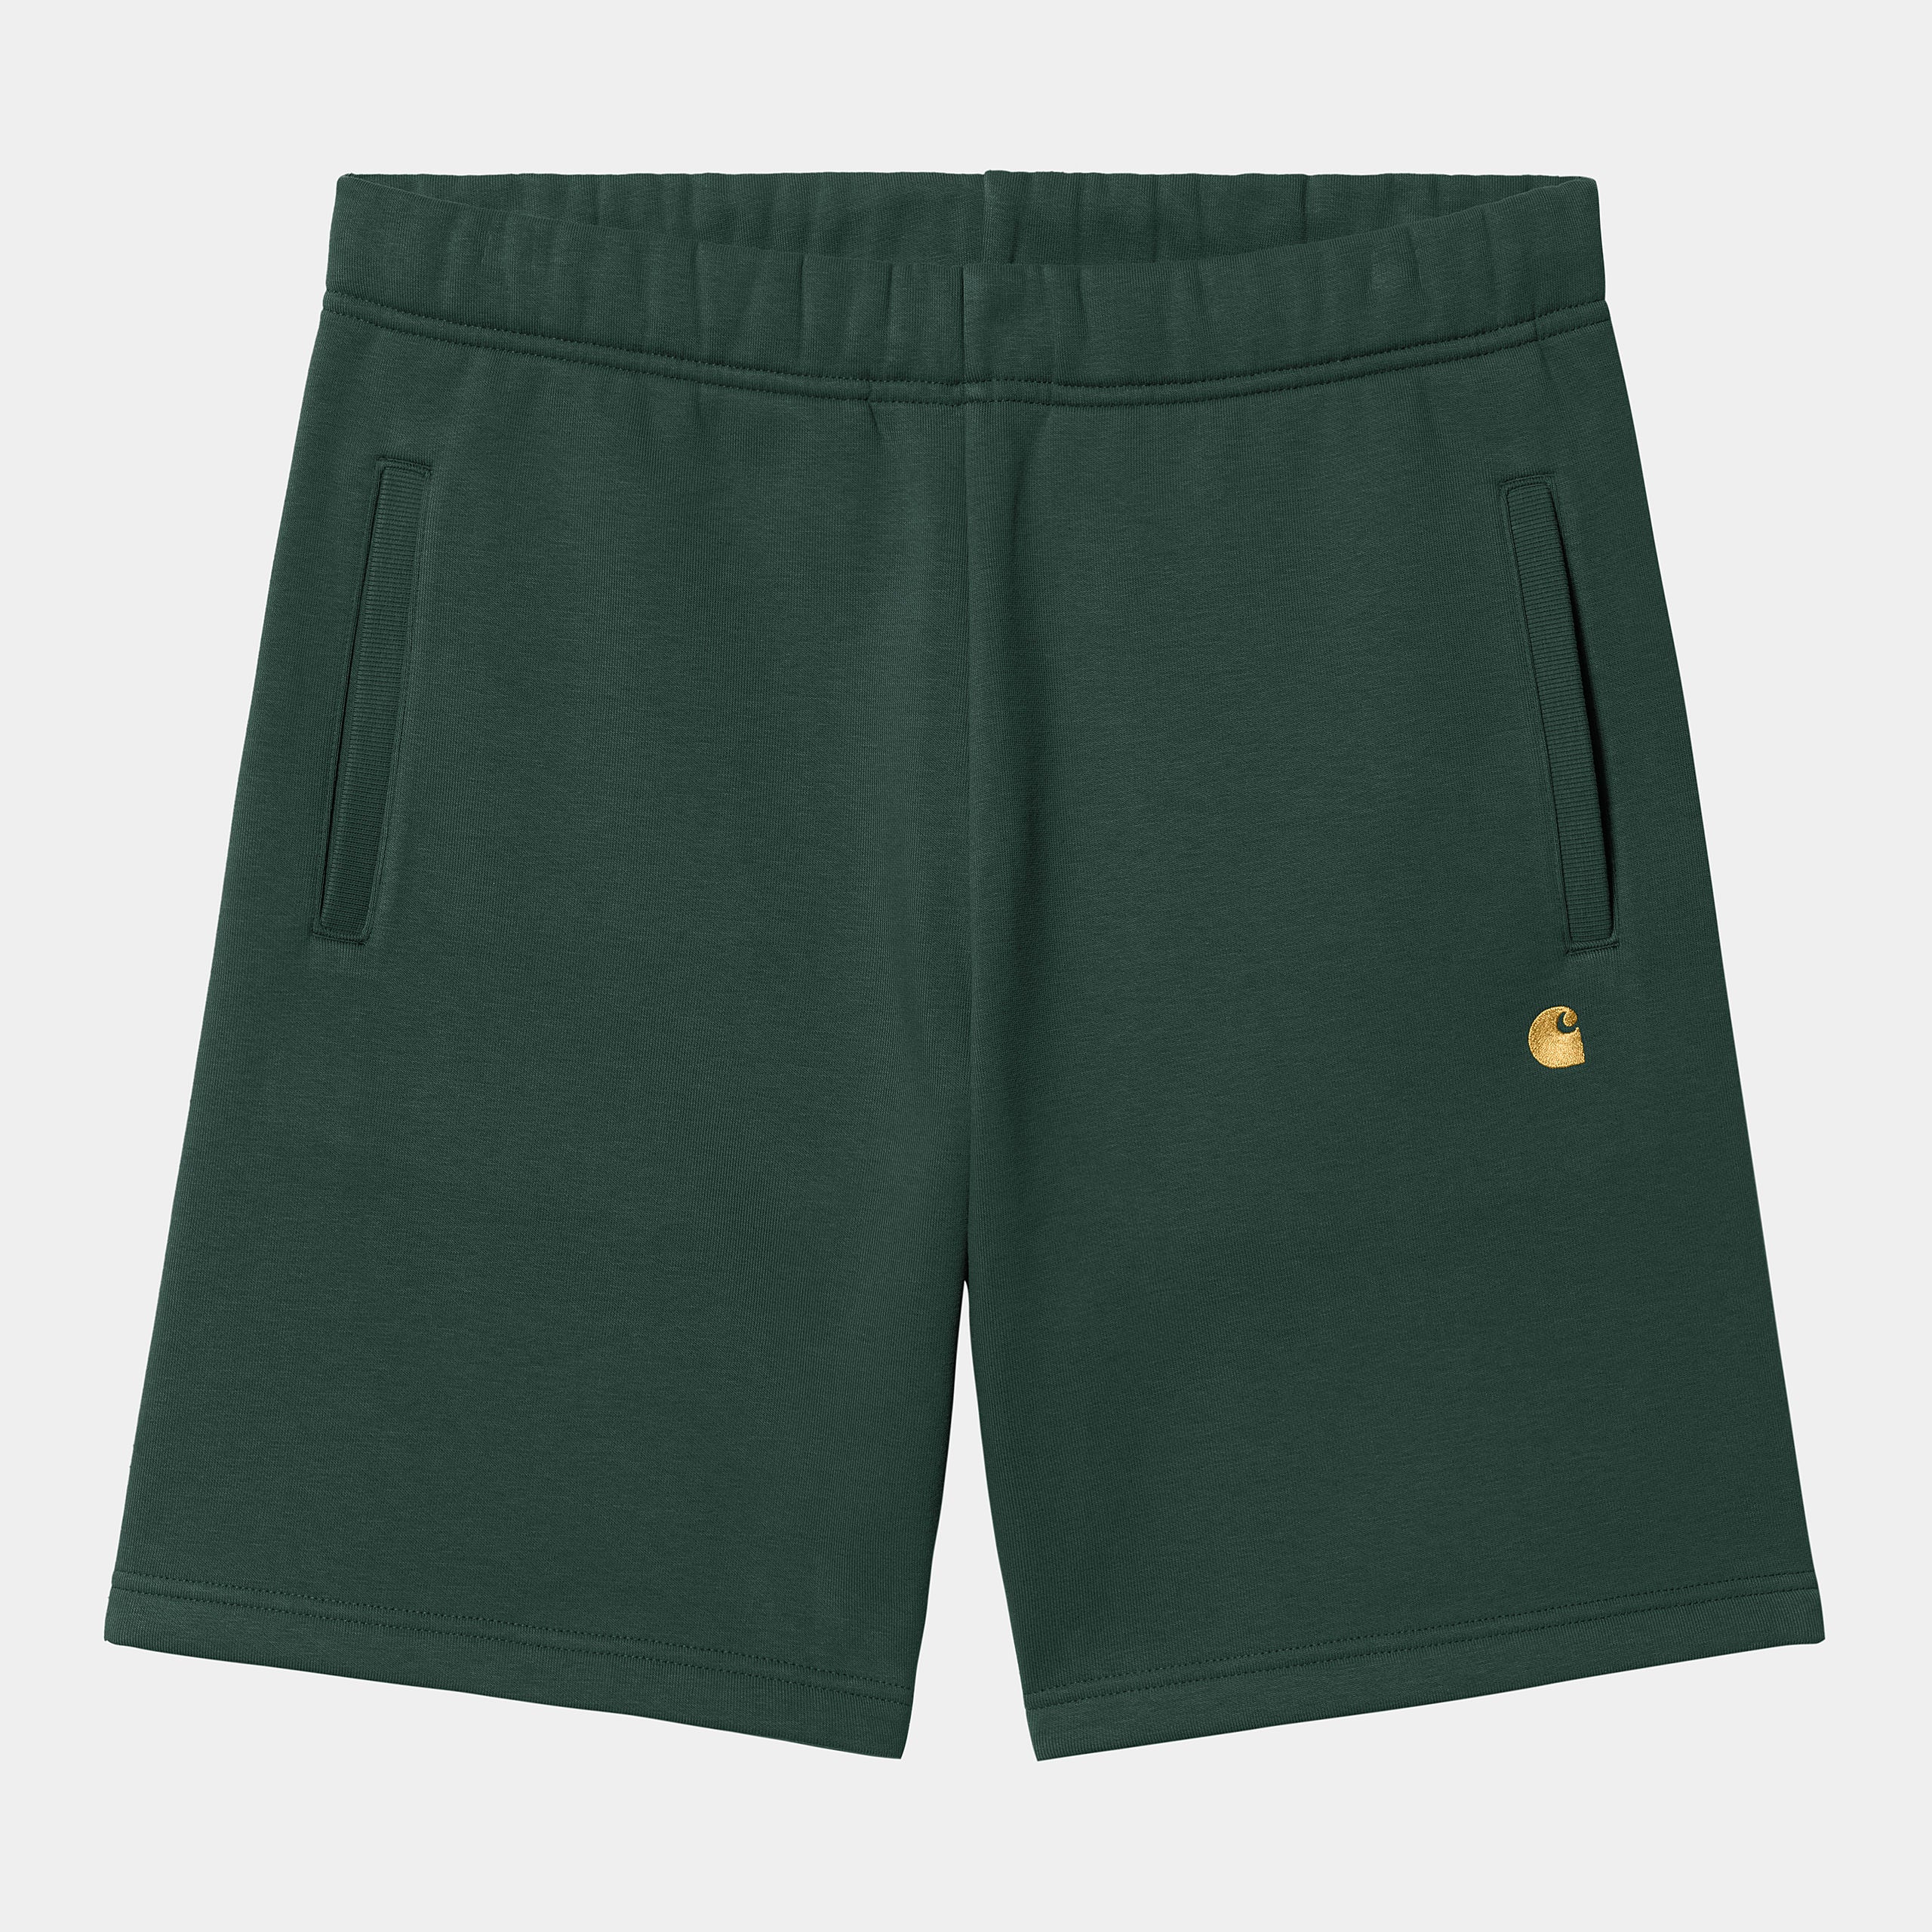 Carhartt WIP Mens Chase Sweat Short - Discovery Green